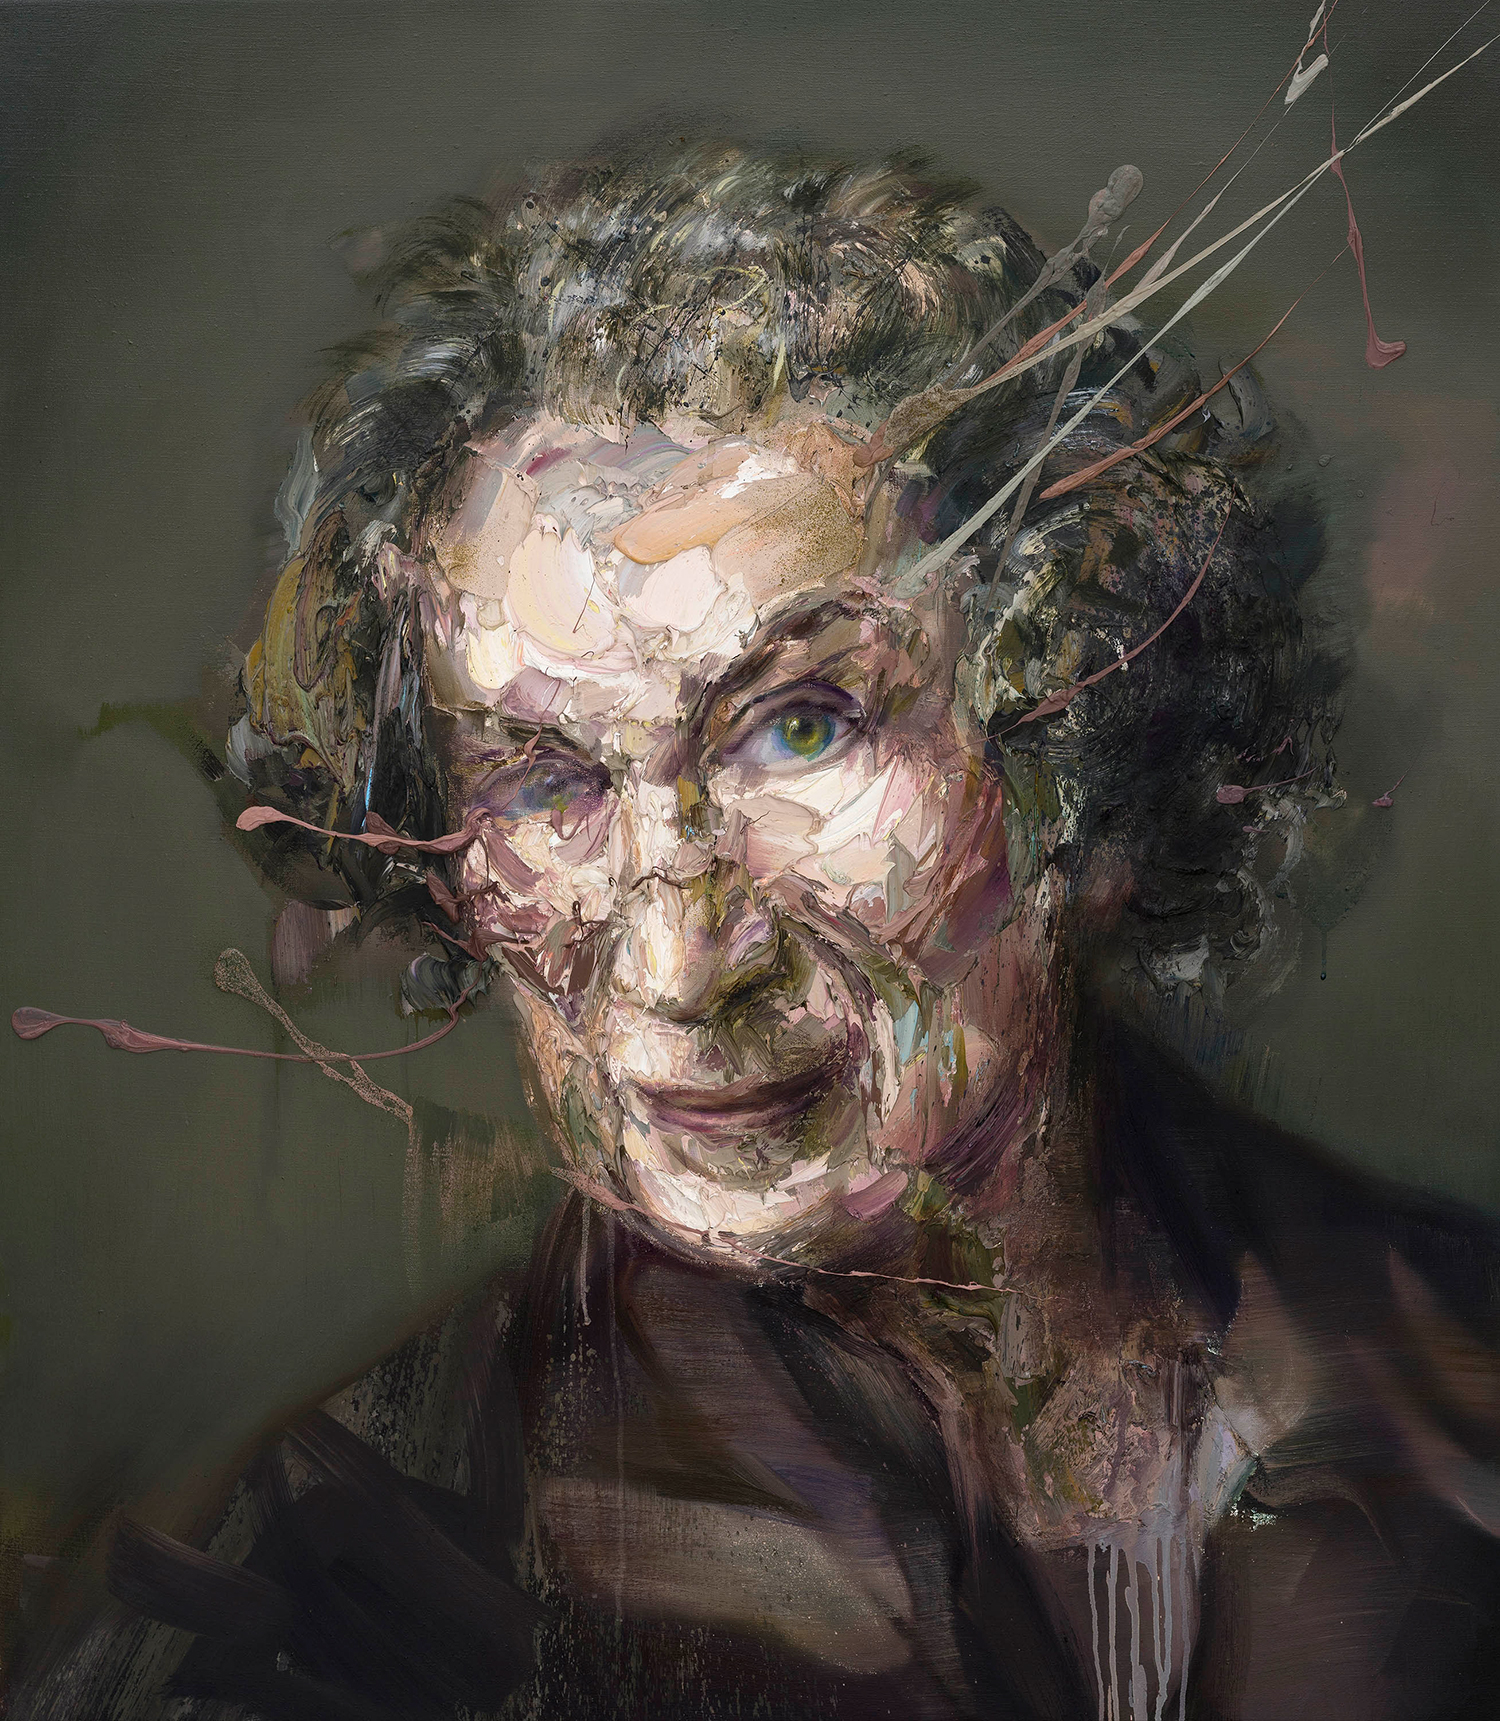 A surreal portrait by Mathieu Laca of Margaret Atwood - dystopia's clairvoyant gaze.